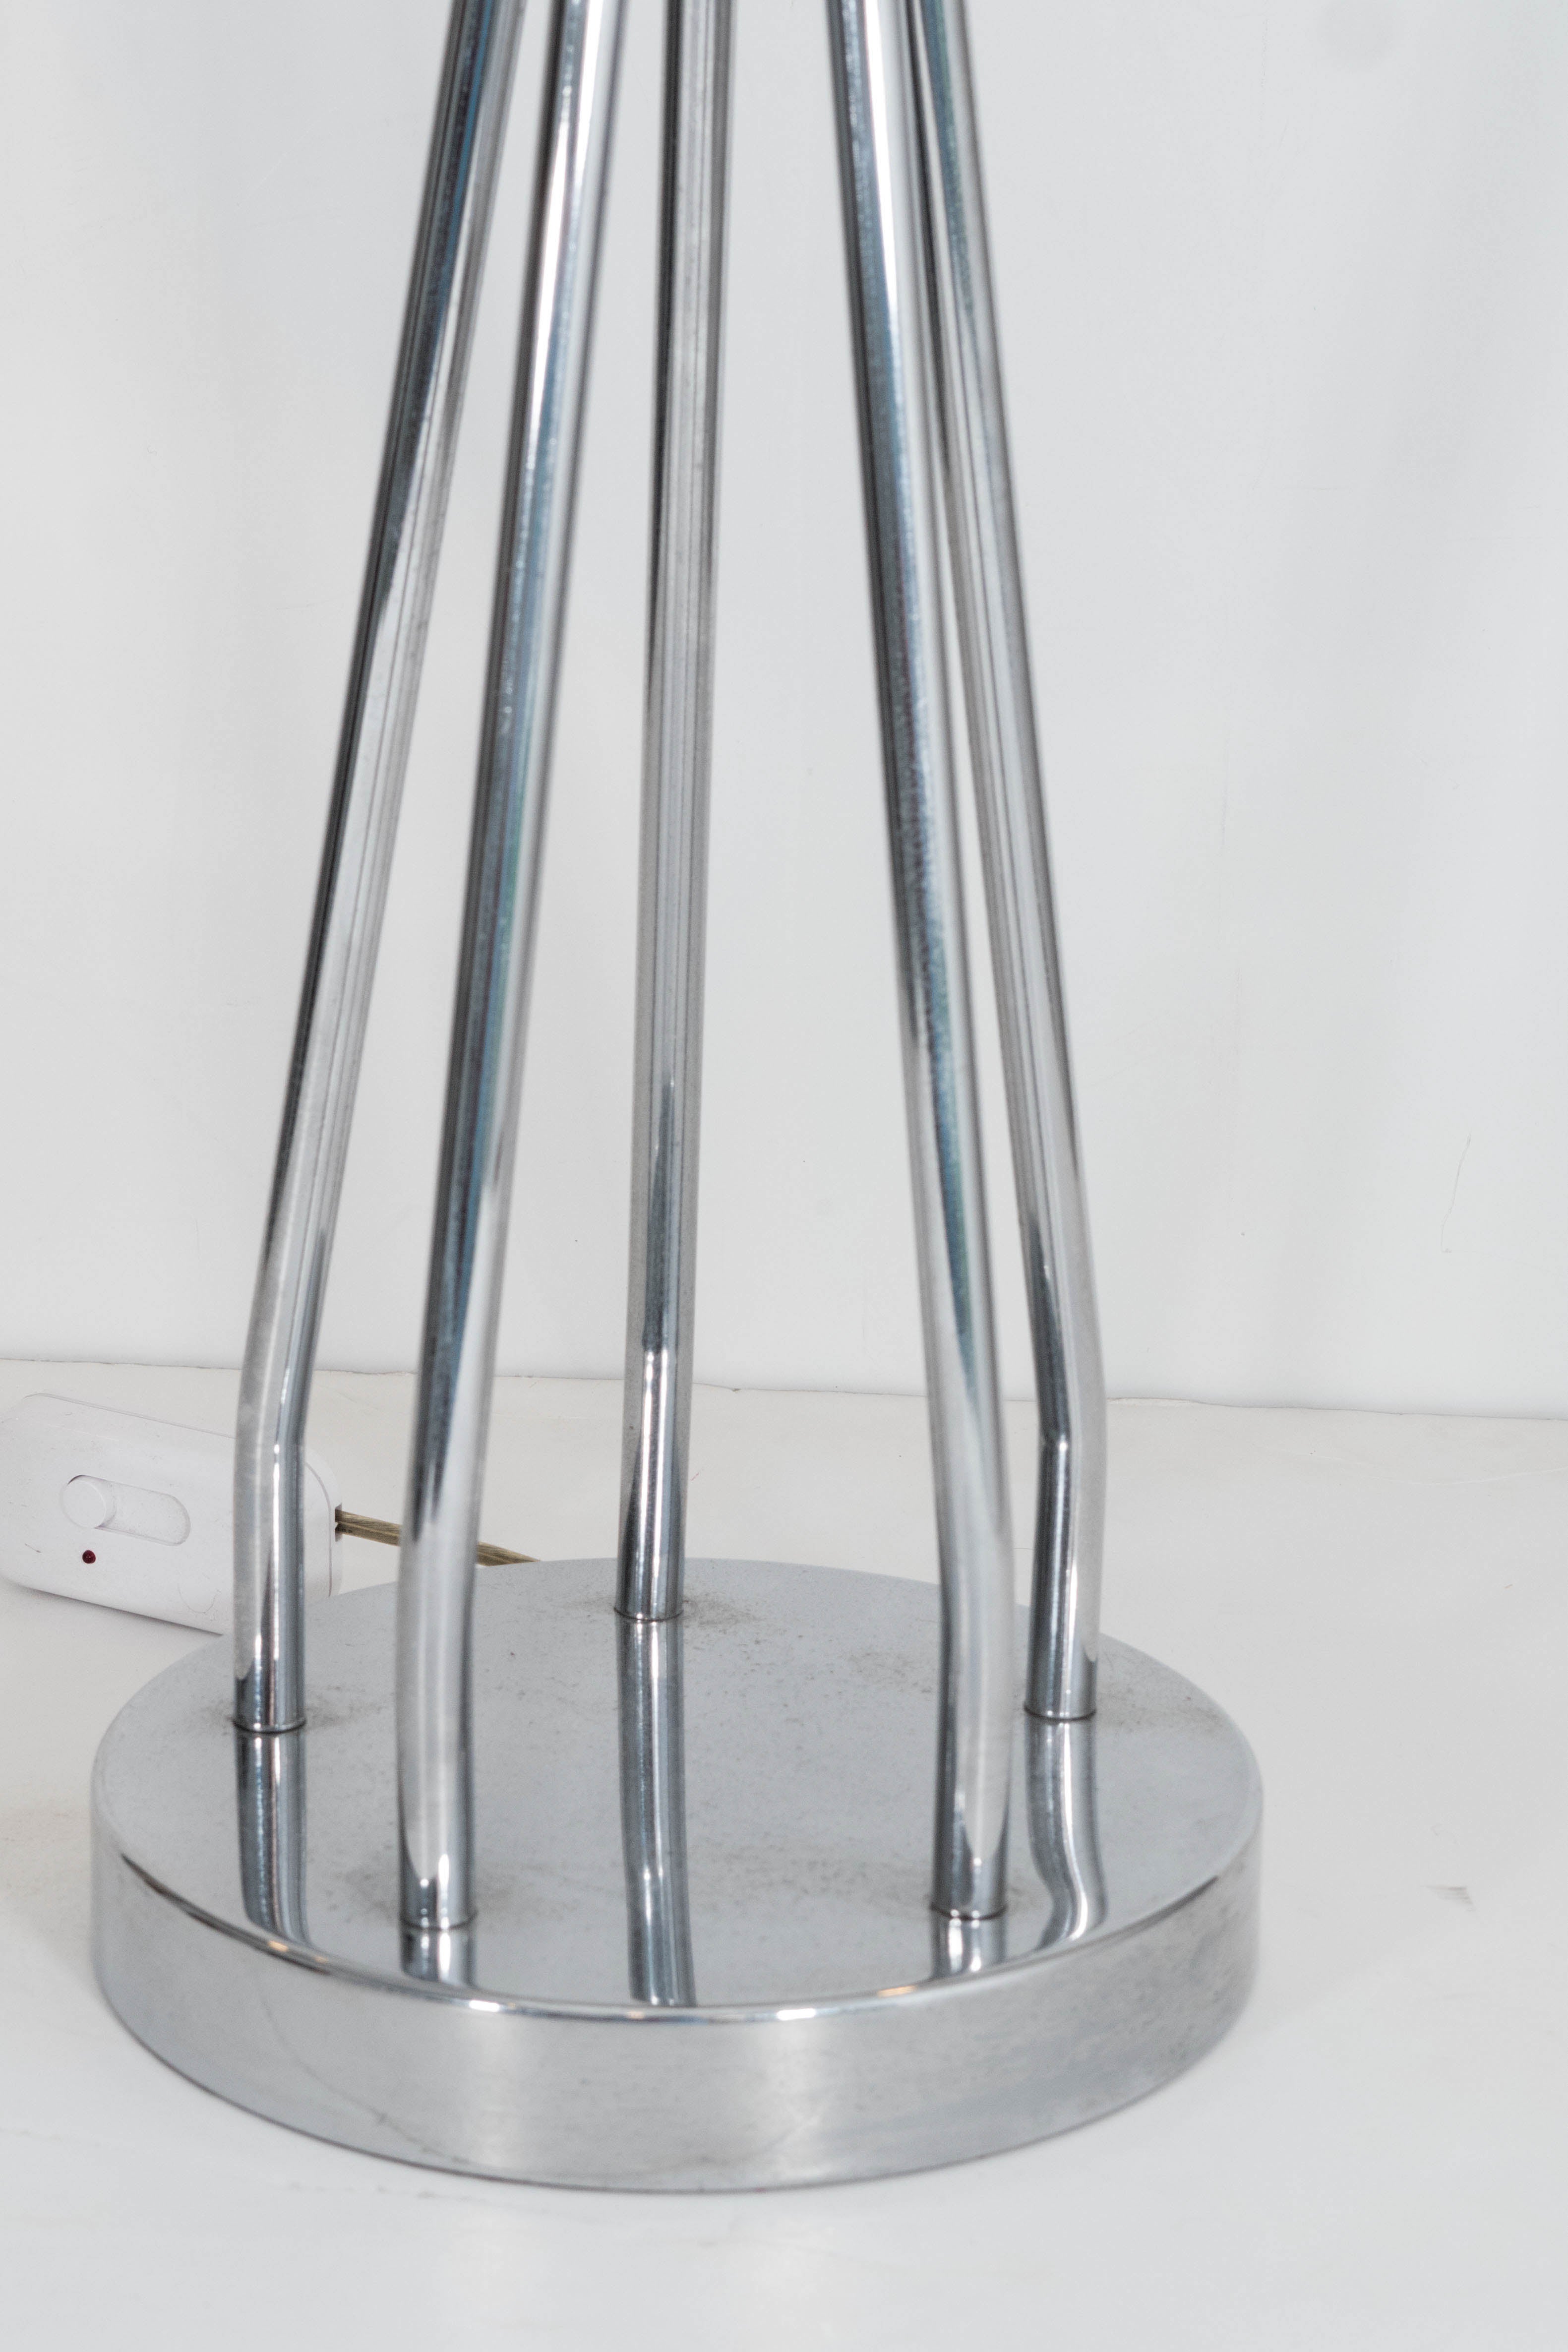 A vintage pair of highly modernistic table lamps, each with a round white globe shade in milk glass, above spire legs and a circular base in polished chrome. Wiring to US standard; includes on/off switch along the extension cord. Very good